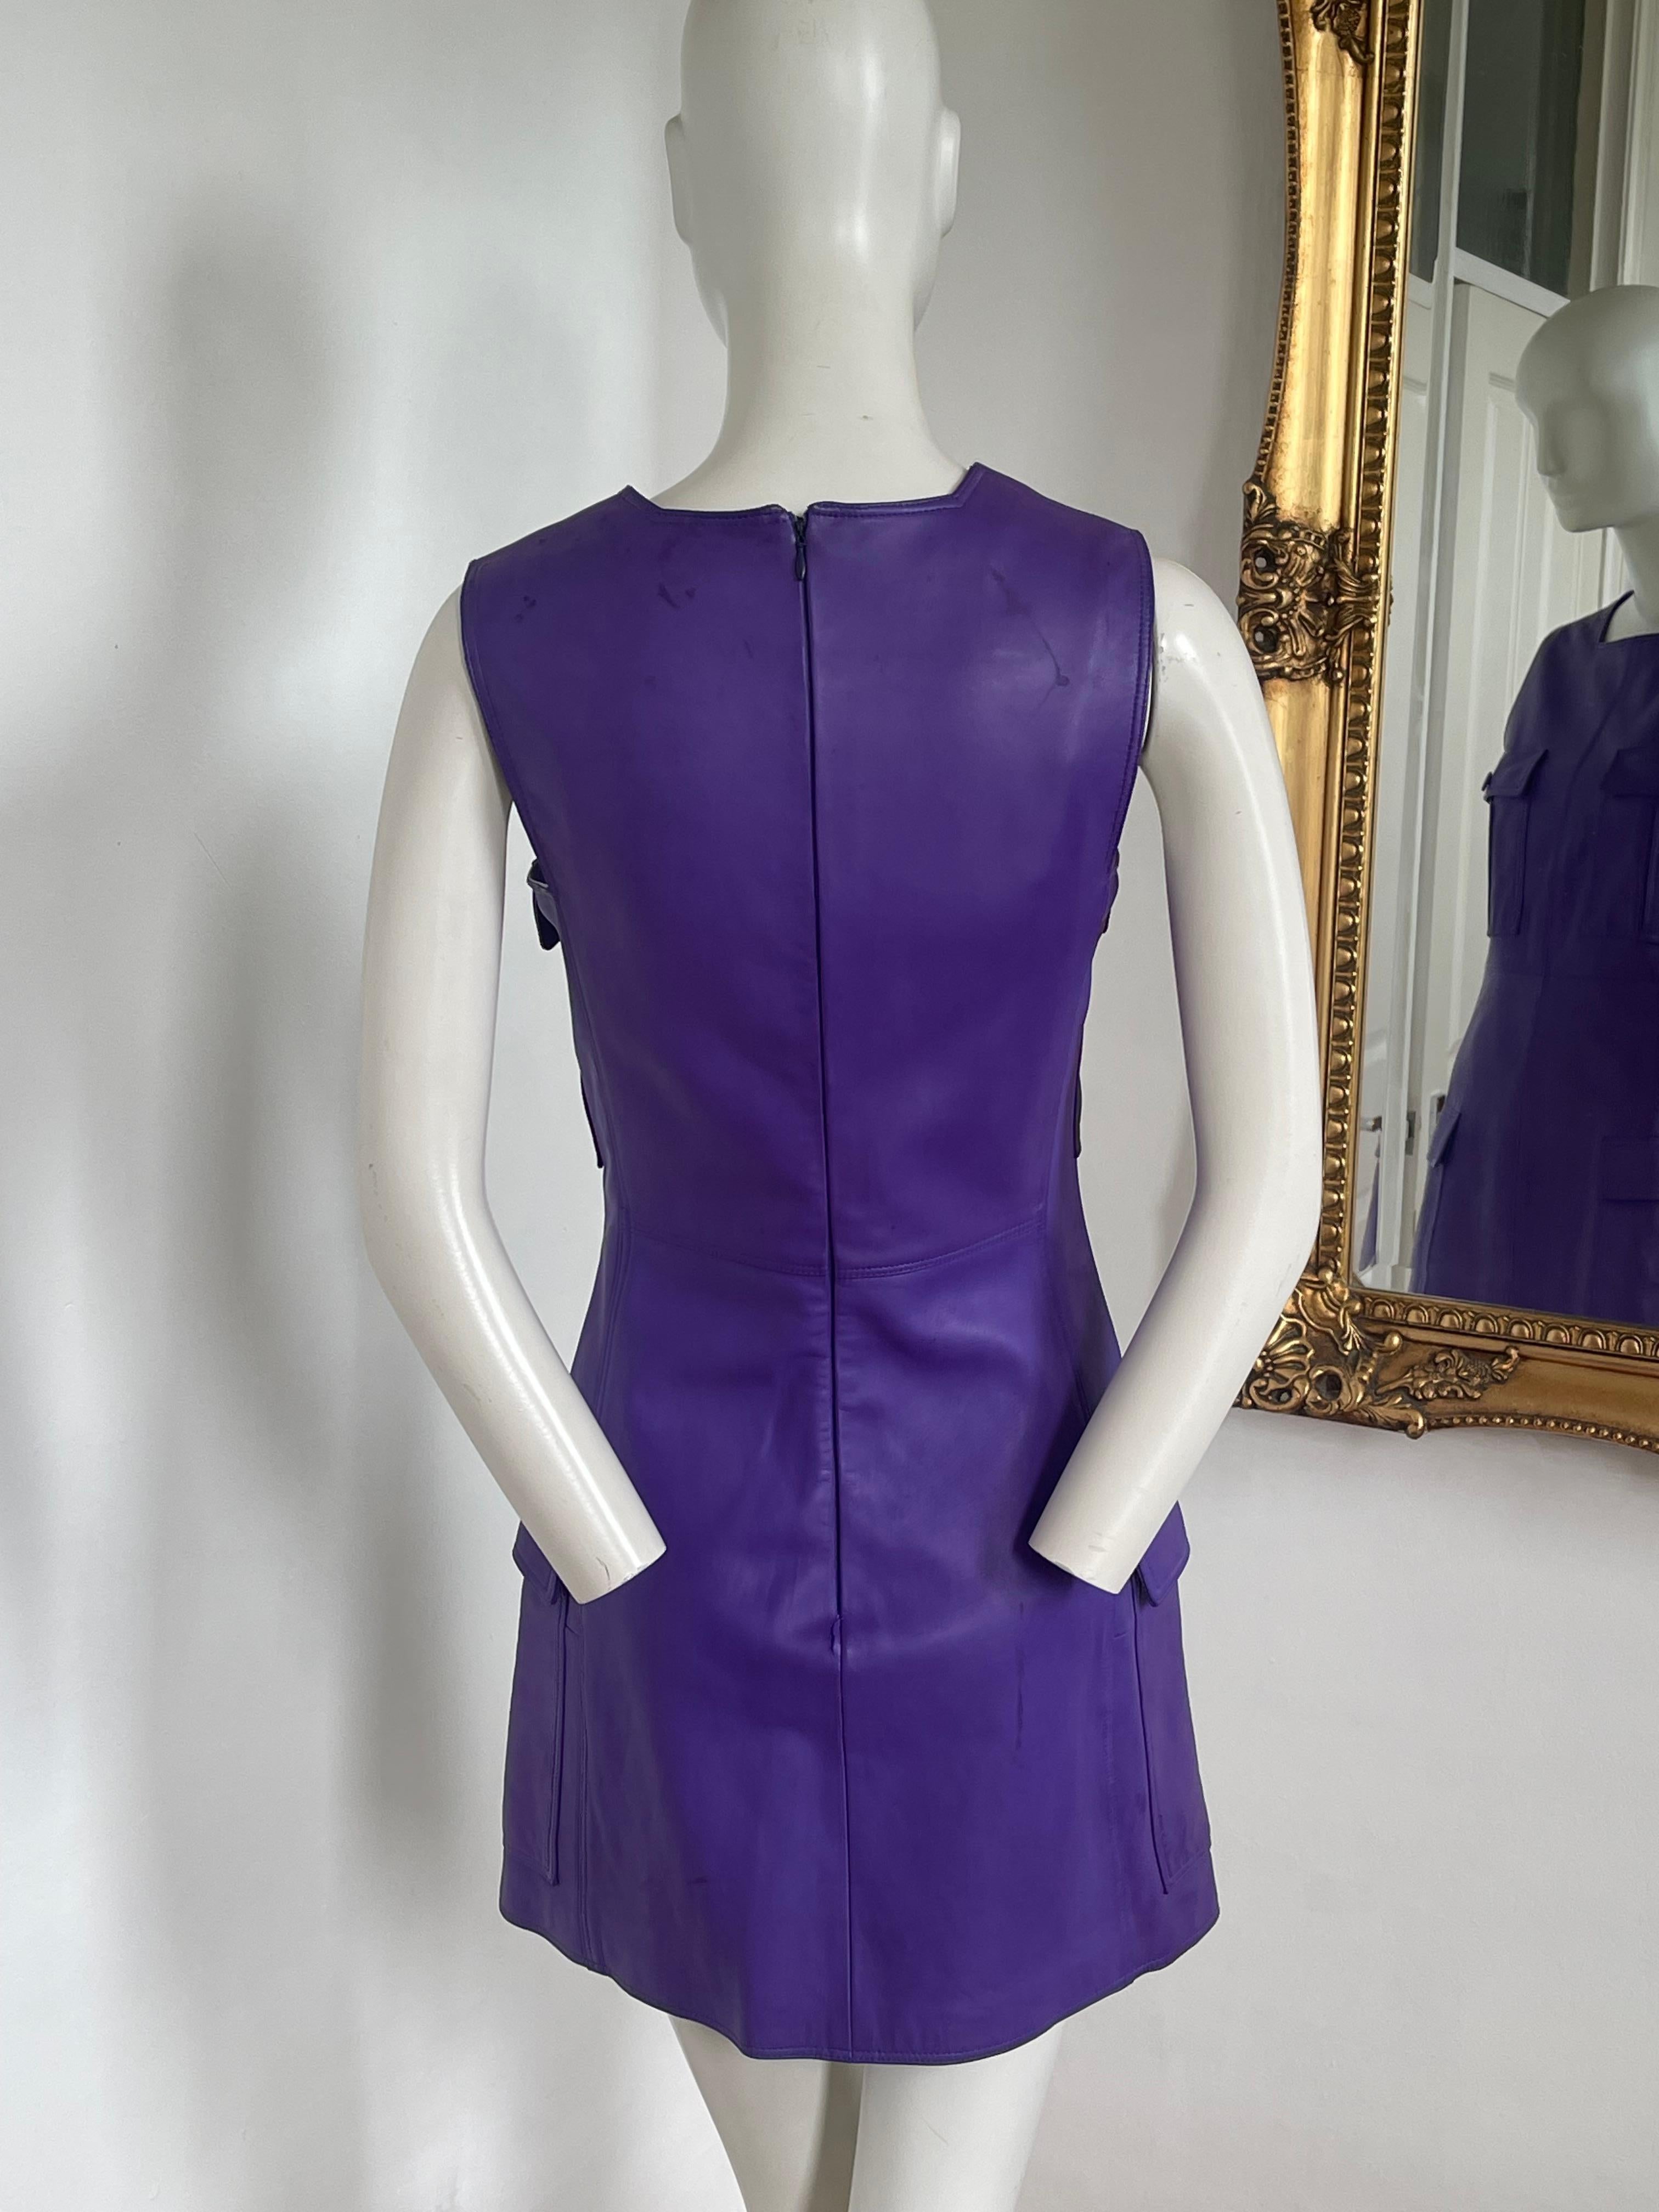 FW 1996 Versace purple leather shift dress with medusa buttons For Sale 1